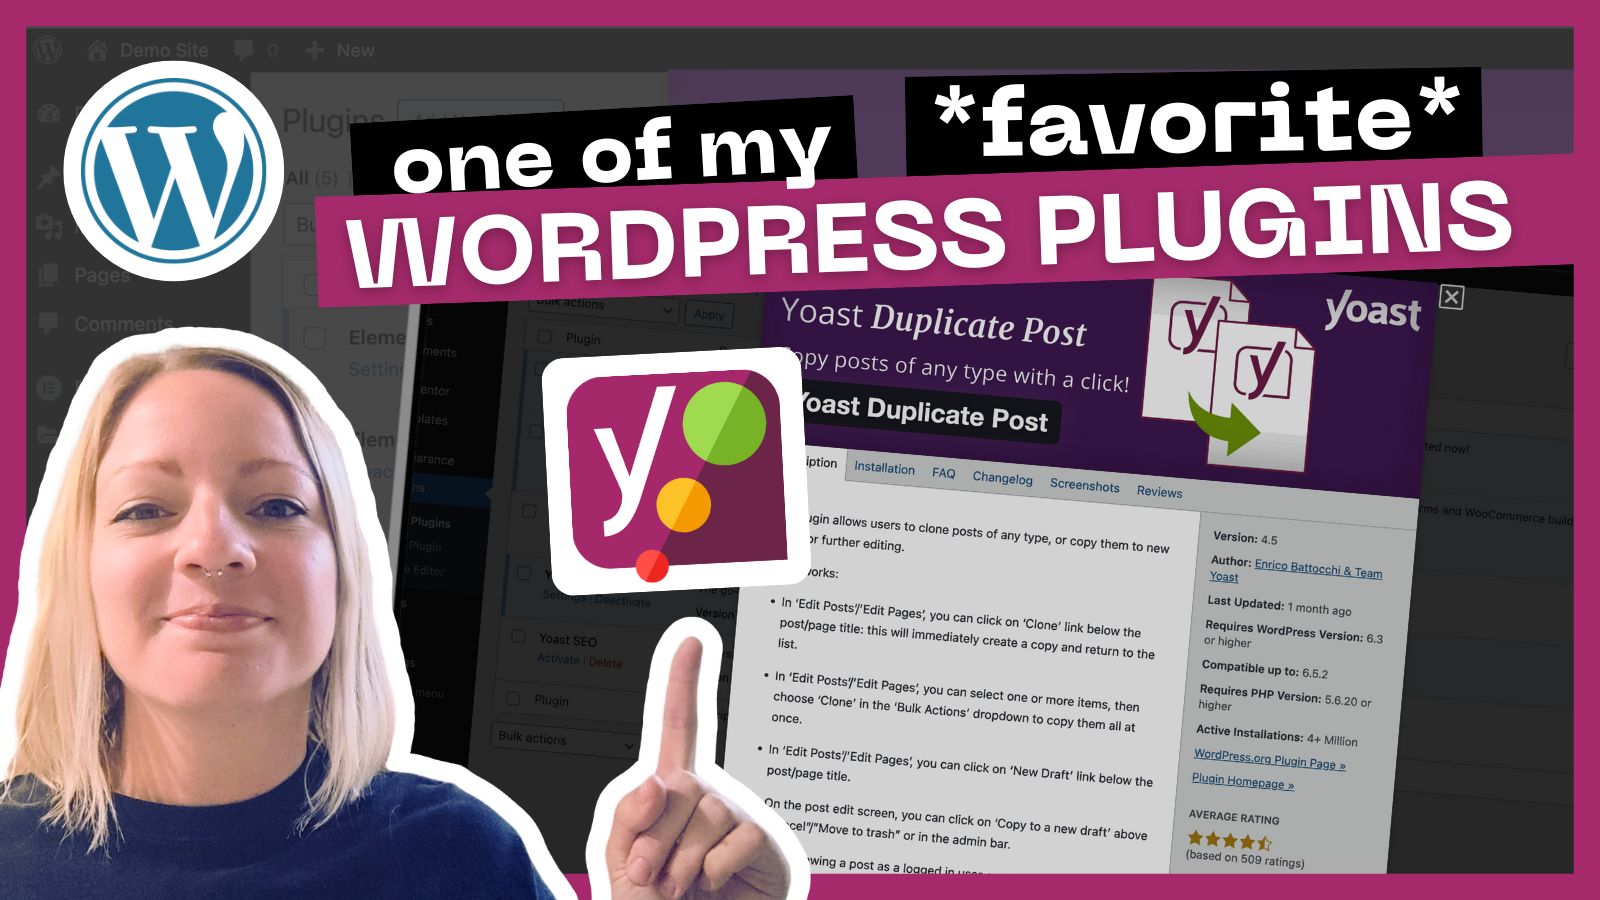 A woman smiling and pointing to her computer screen, which displays a favorite wordpress plugin, "yoast duplicate post", with graphics and text promoting the plugin.